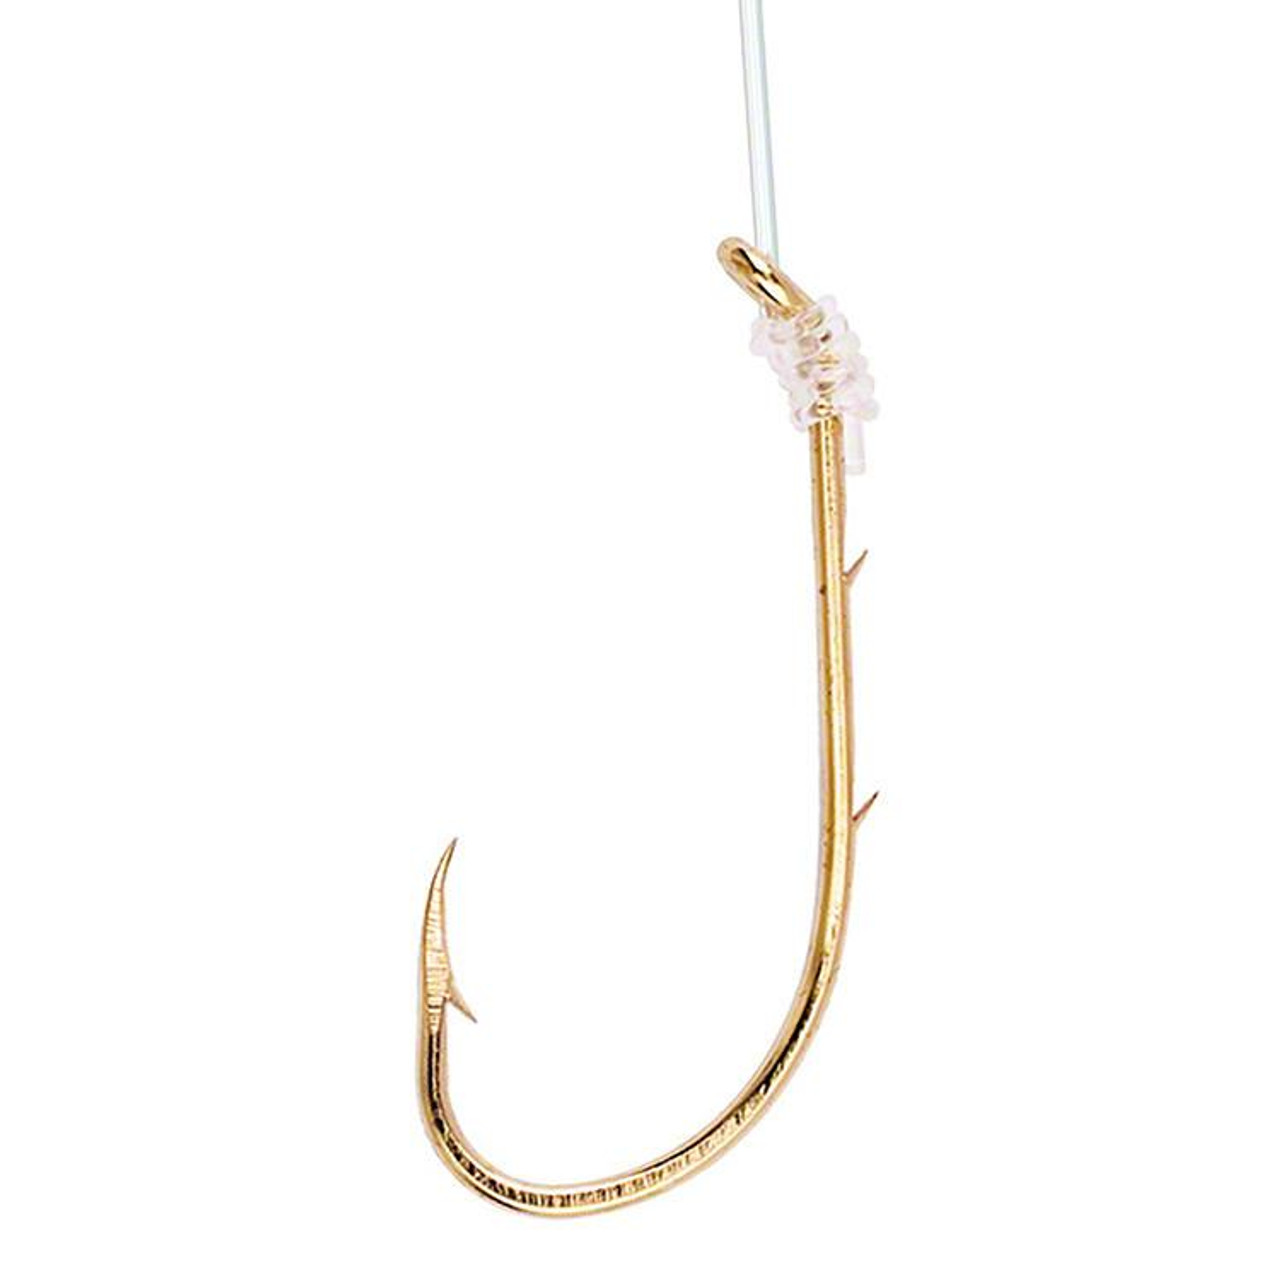 Eagle Claw Lazer Sharp Baitholder Snelled Gold Hooks with 18 Line -  Kinsey's Outdoors